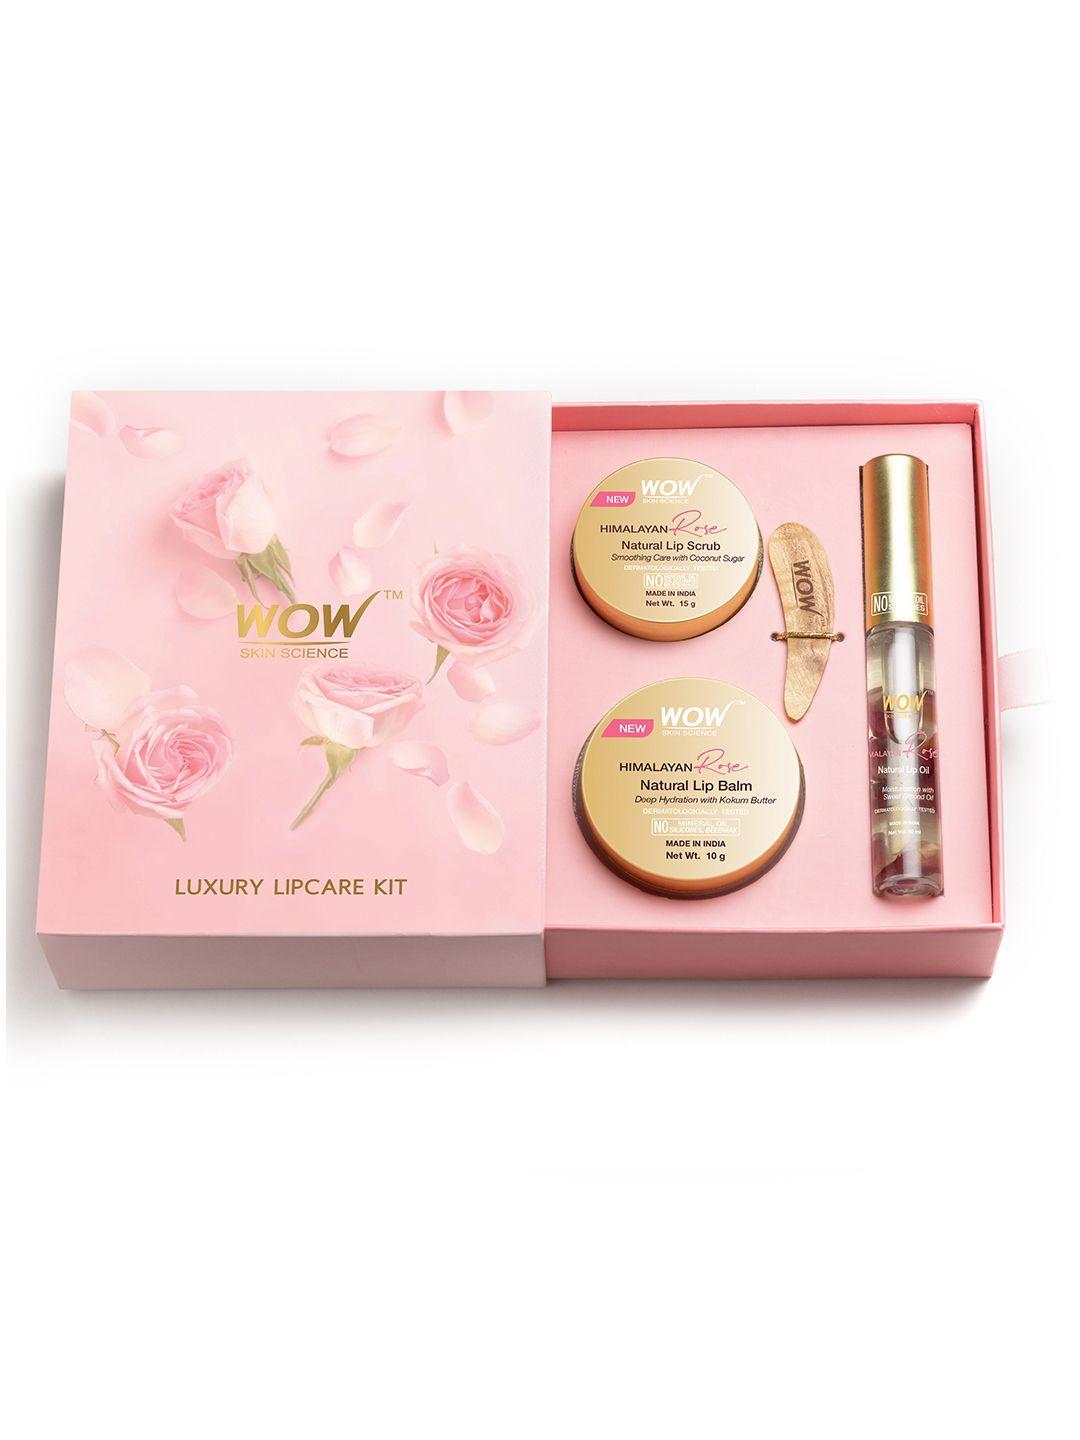 wow skin science lip smoothing & softening luxury lip care kit for chapped lips - 250ml